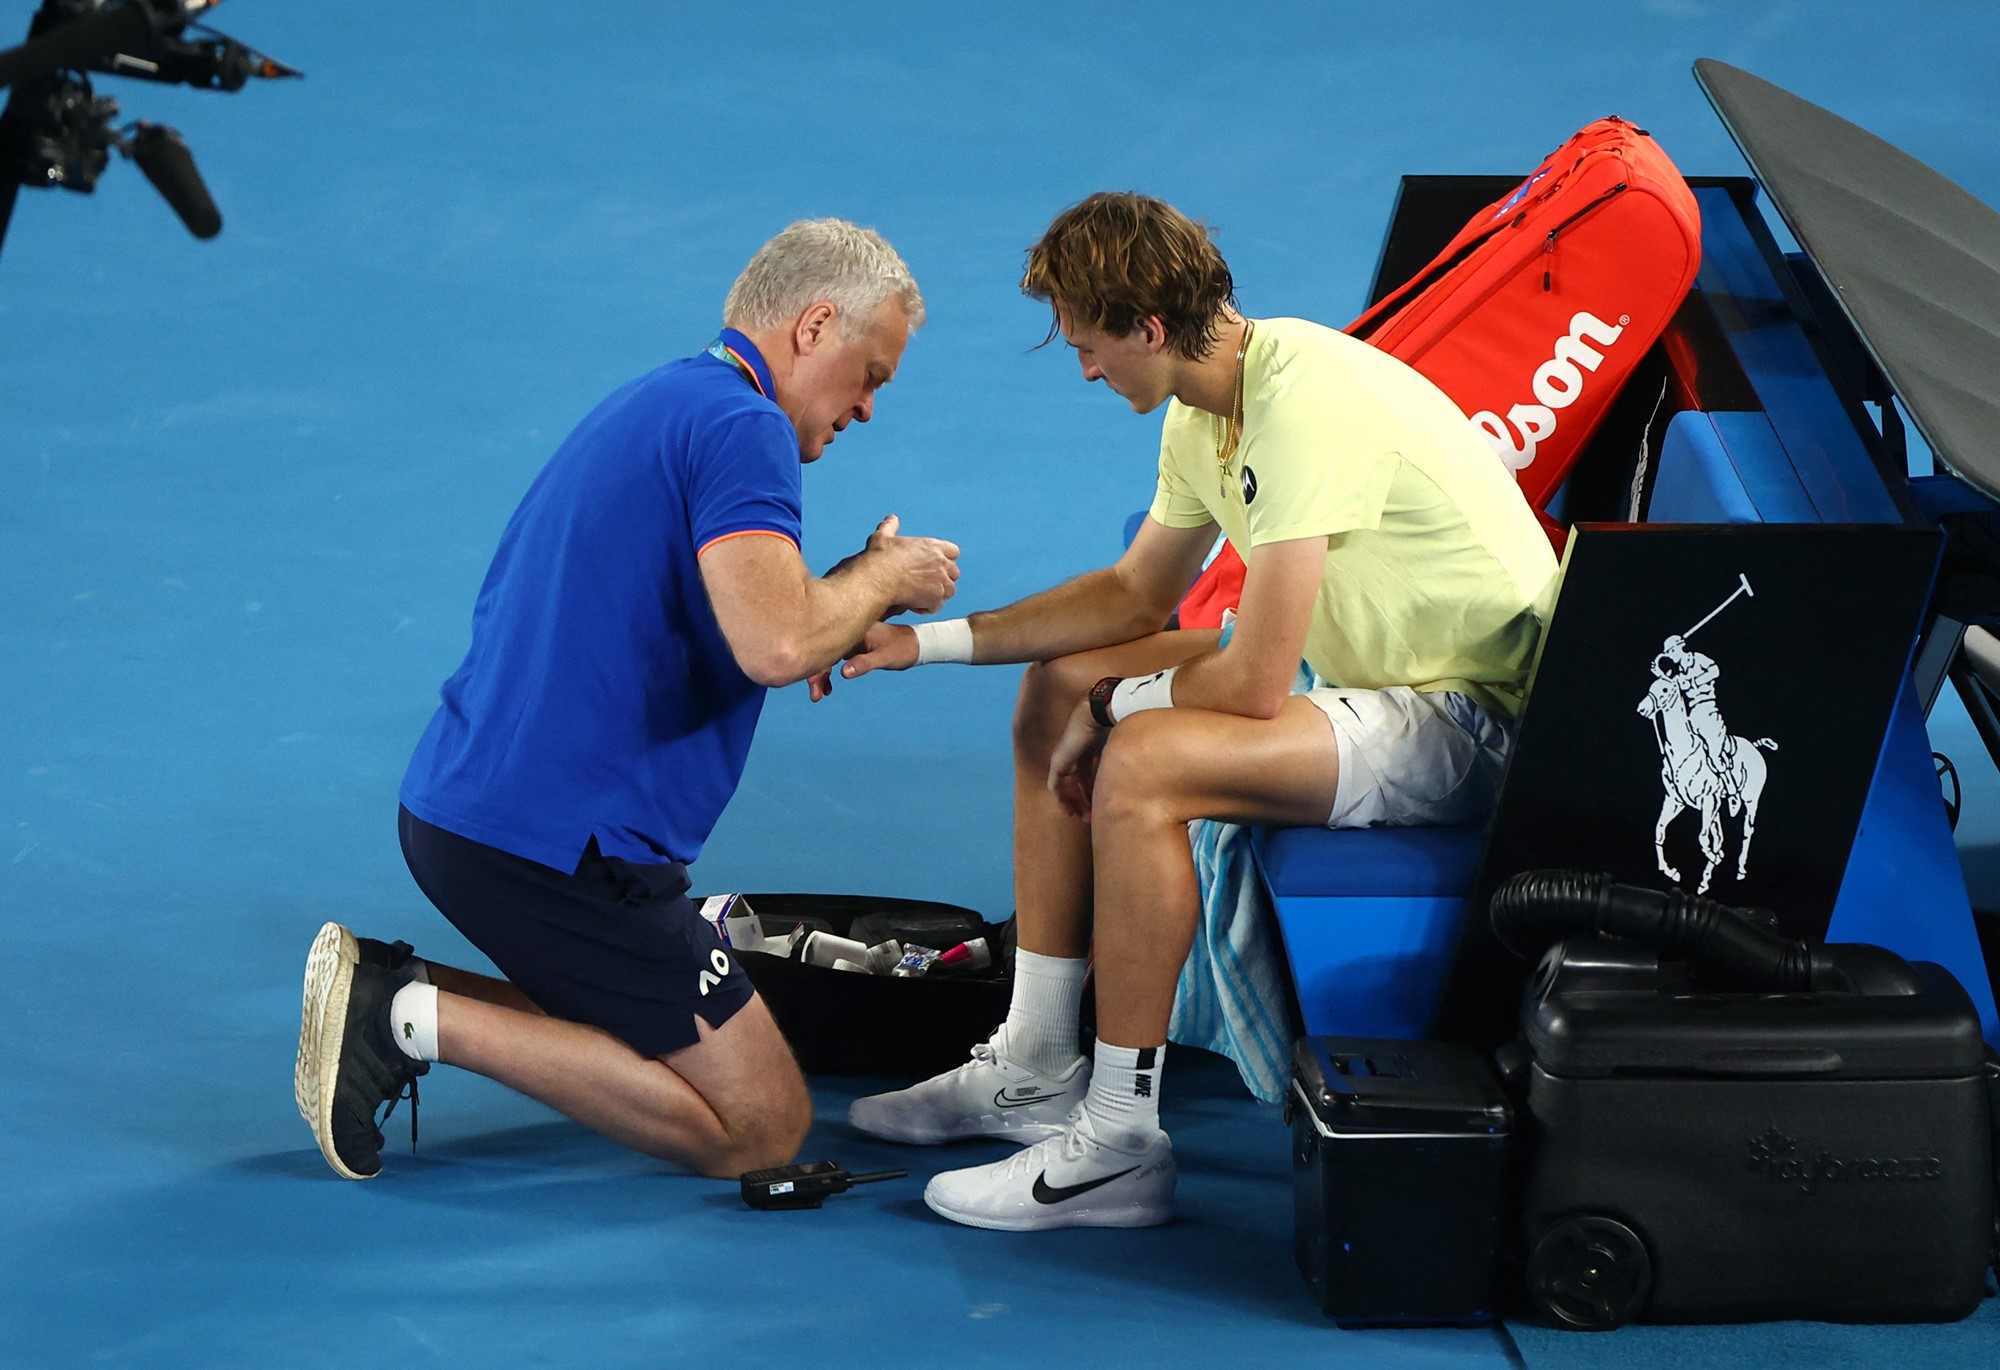 A physio attends to a tennis player.